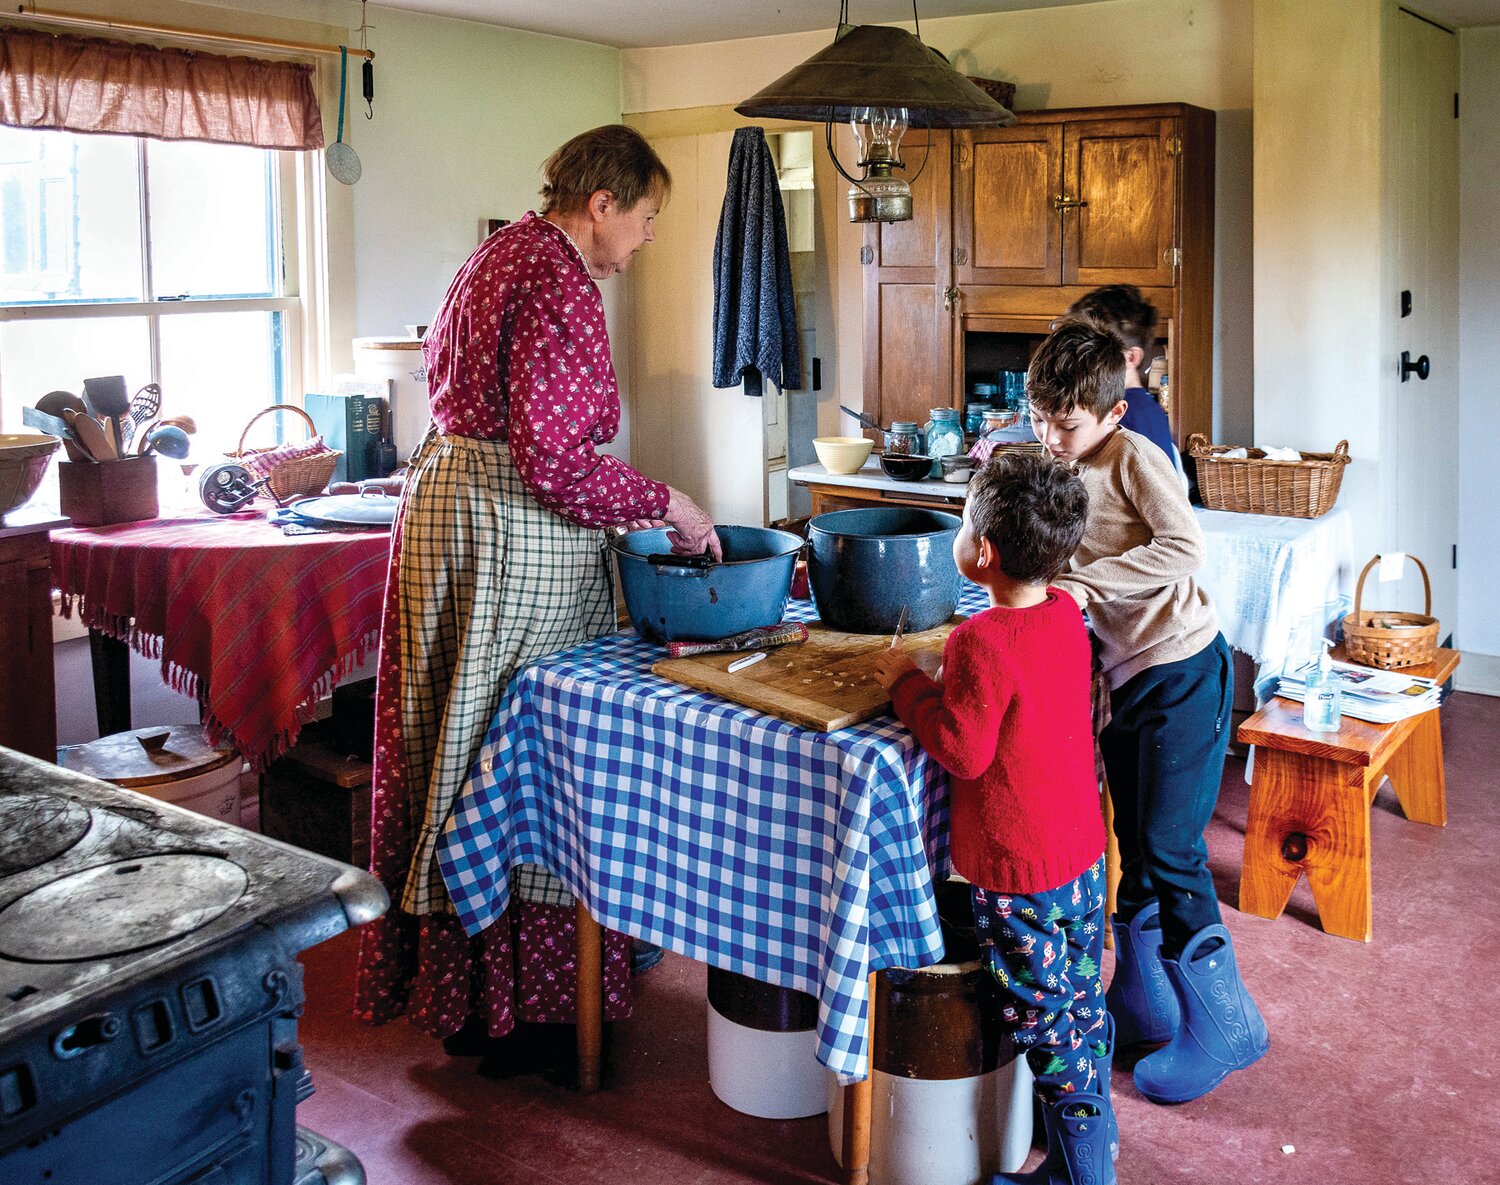 Farm worker Jane Kidder makes applesauce with the help of, from left, Rafa Bliss Woodbury, Luca Bliss Woodbury and Mars Bliss Woodbury.